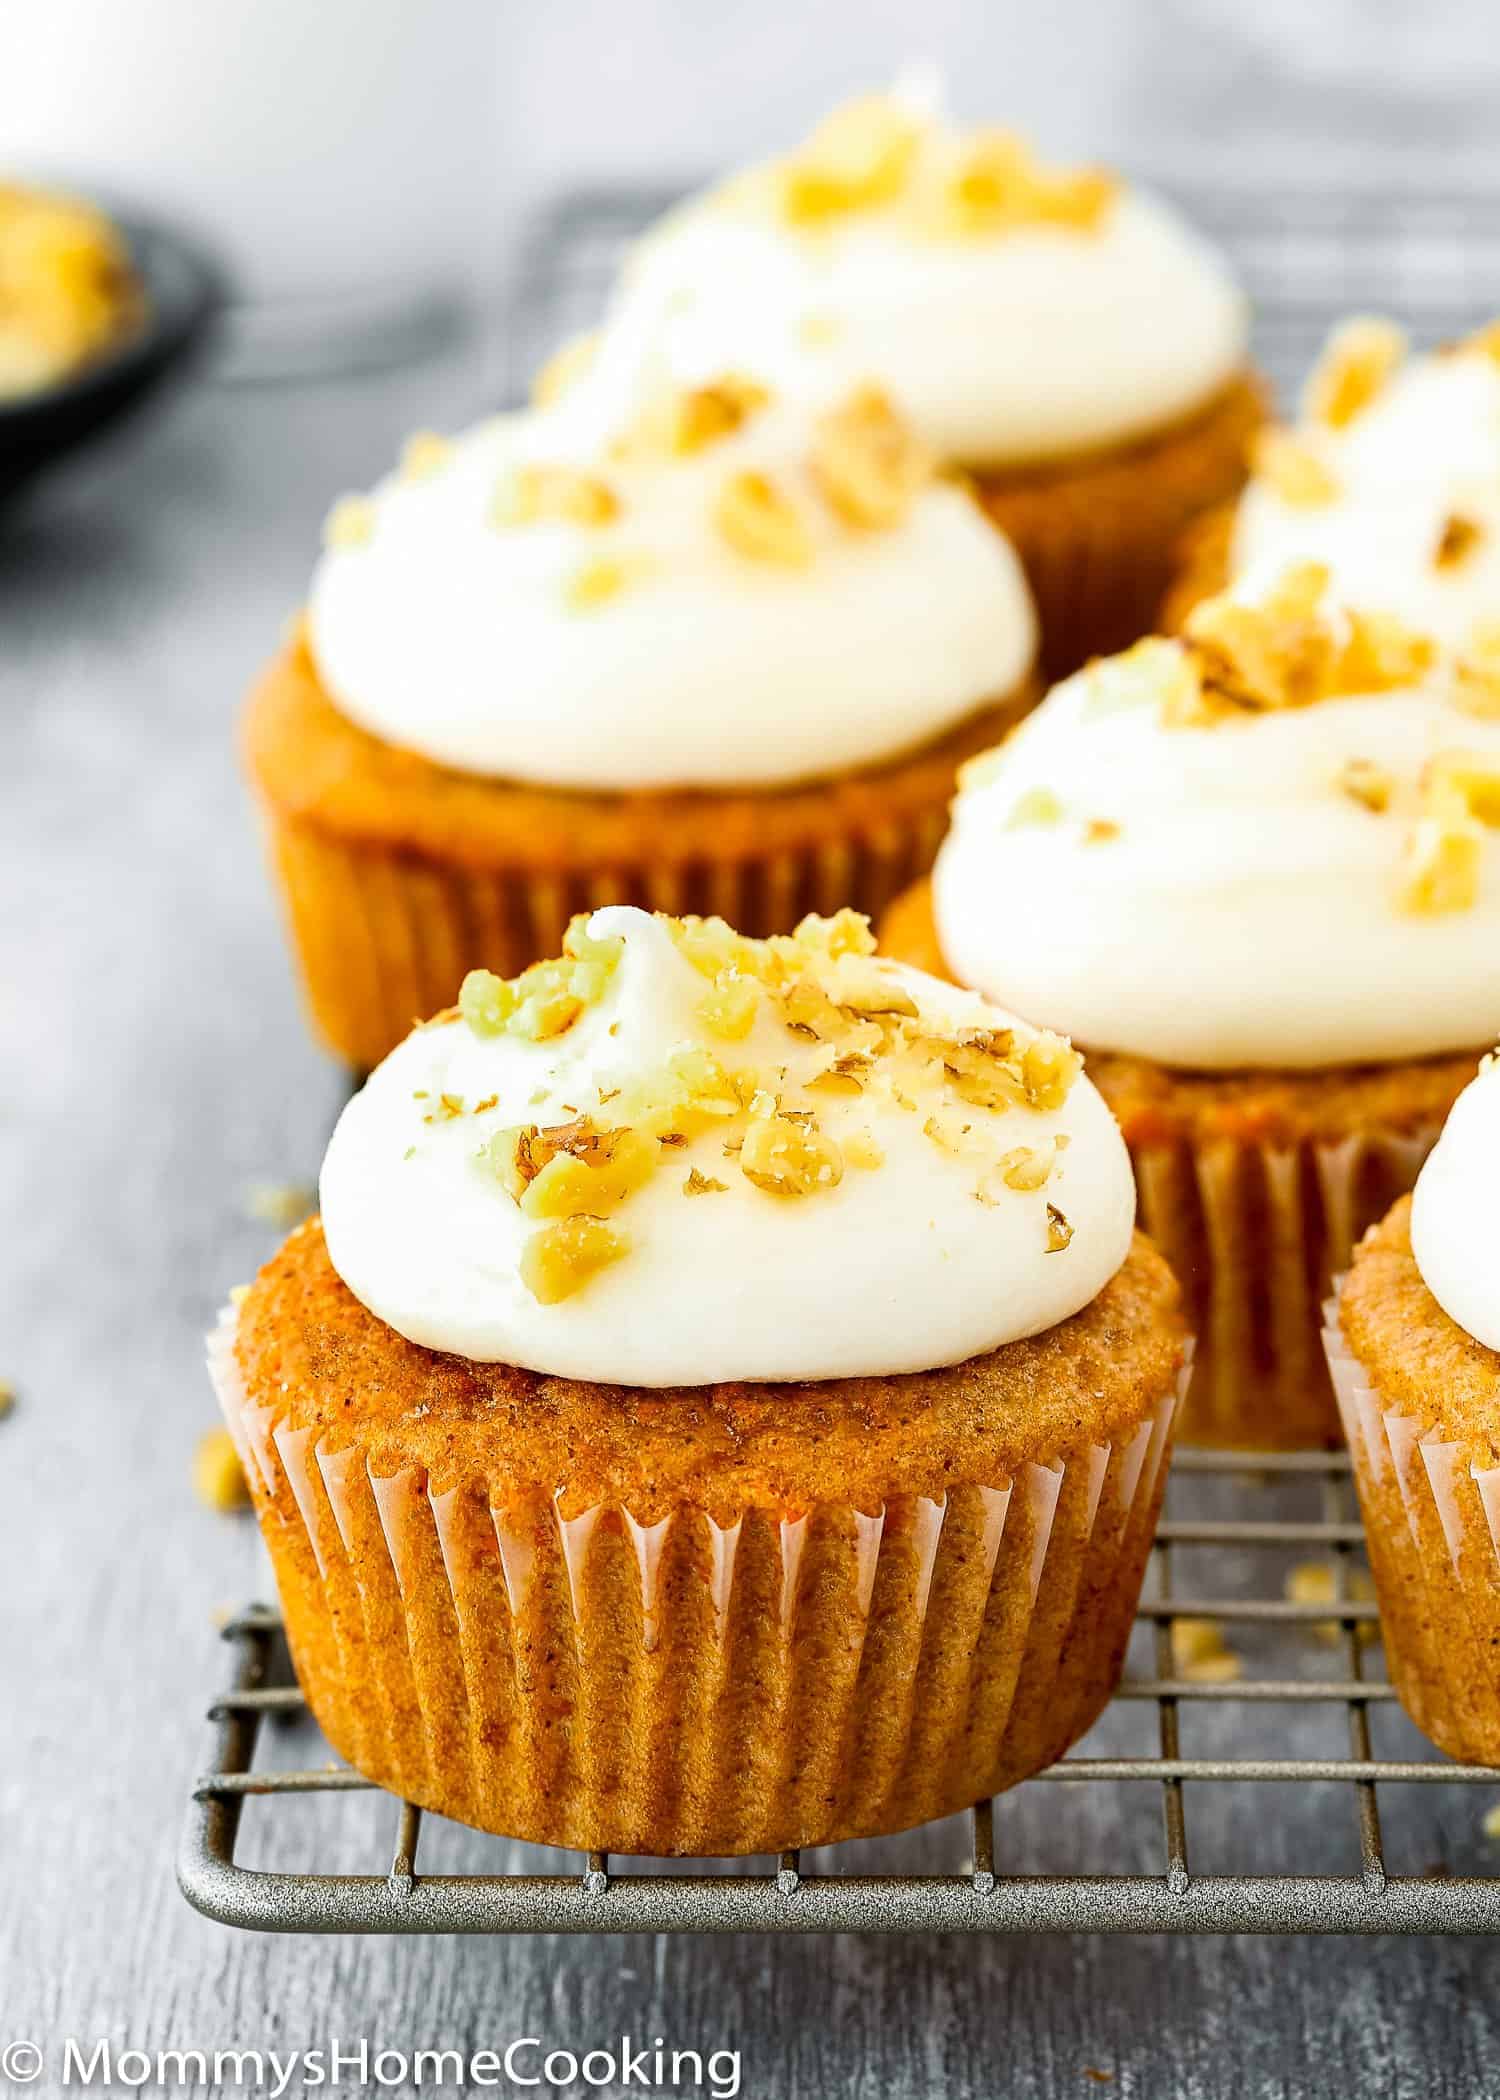 Eggless Carrot Cake Cupcakes with cream cheese frosting